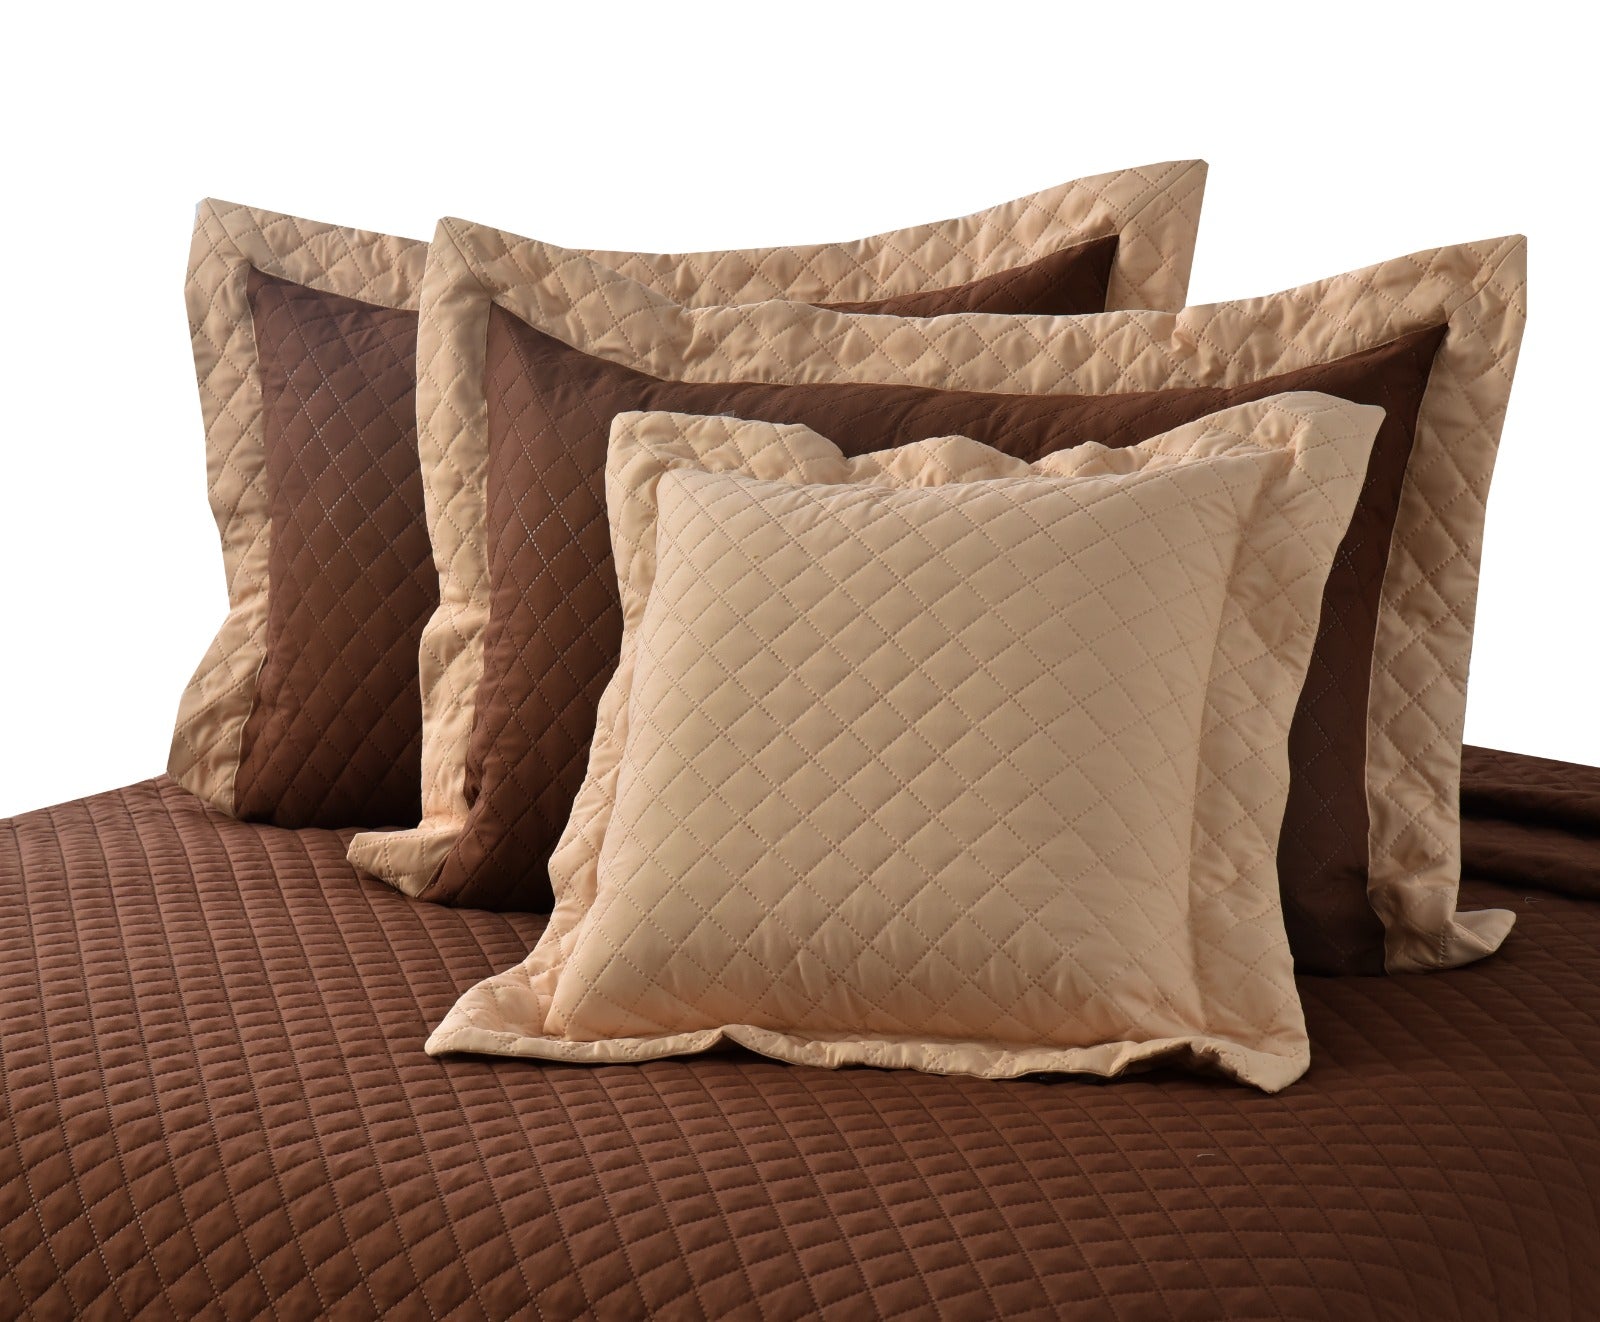 4 PCs Ultrasonic Quilted Luxury Bed Spread Set-Brown Apricot